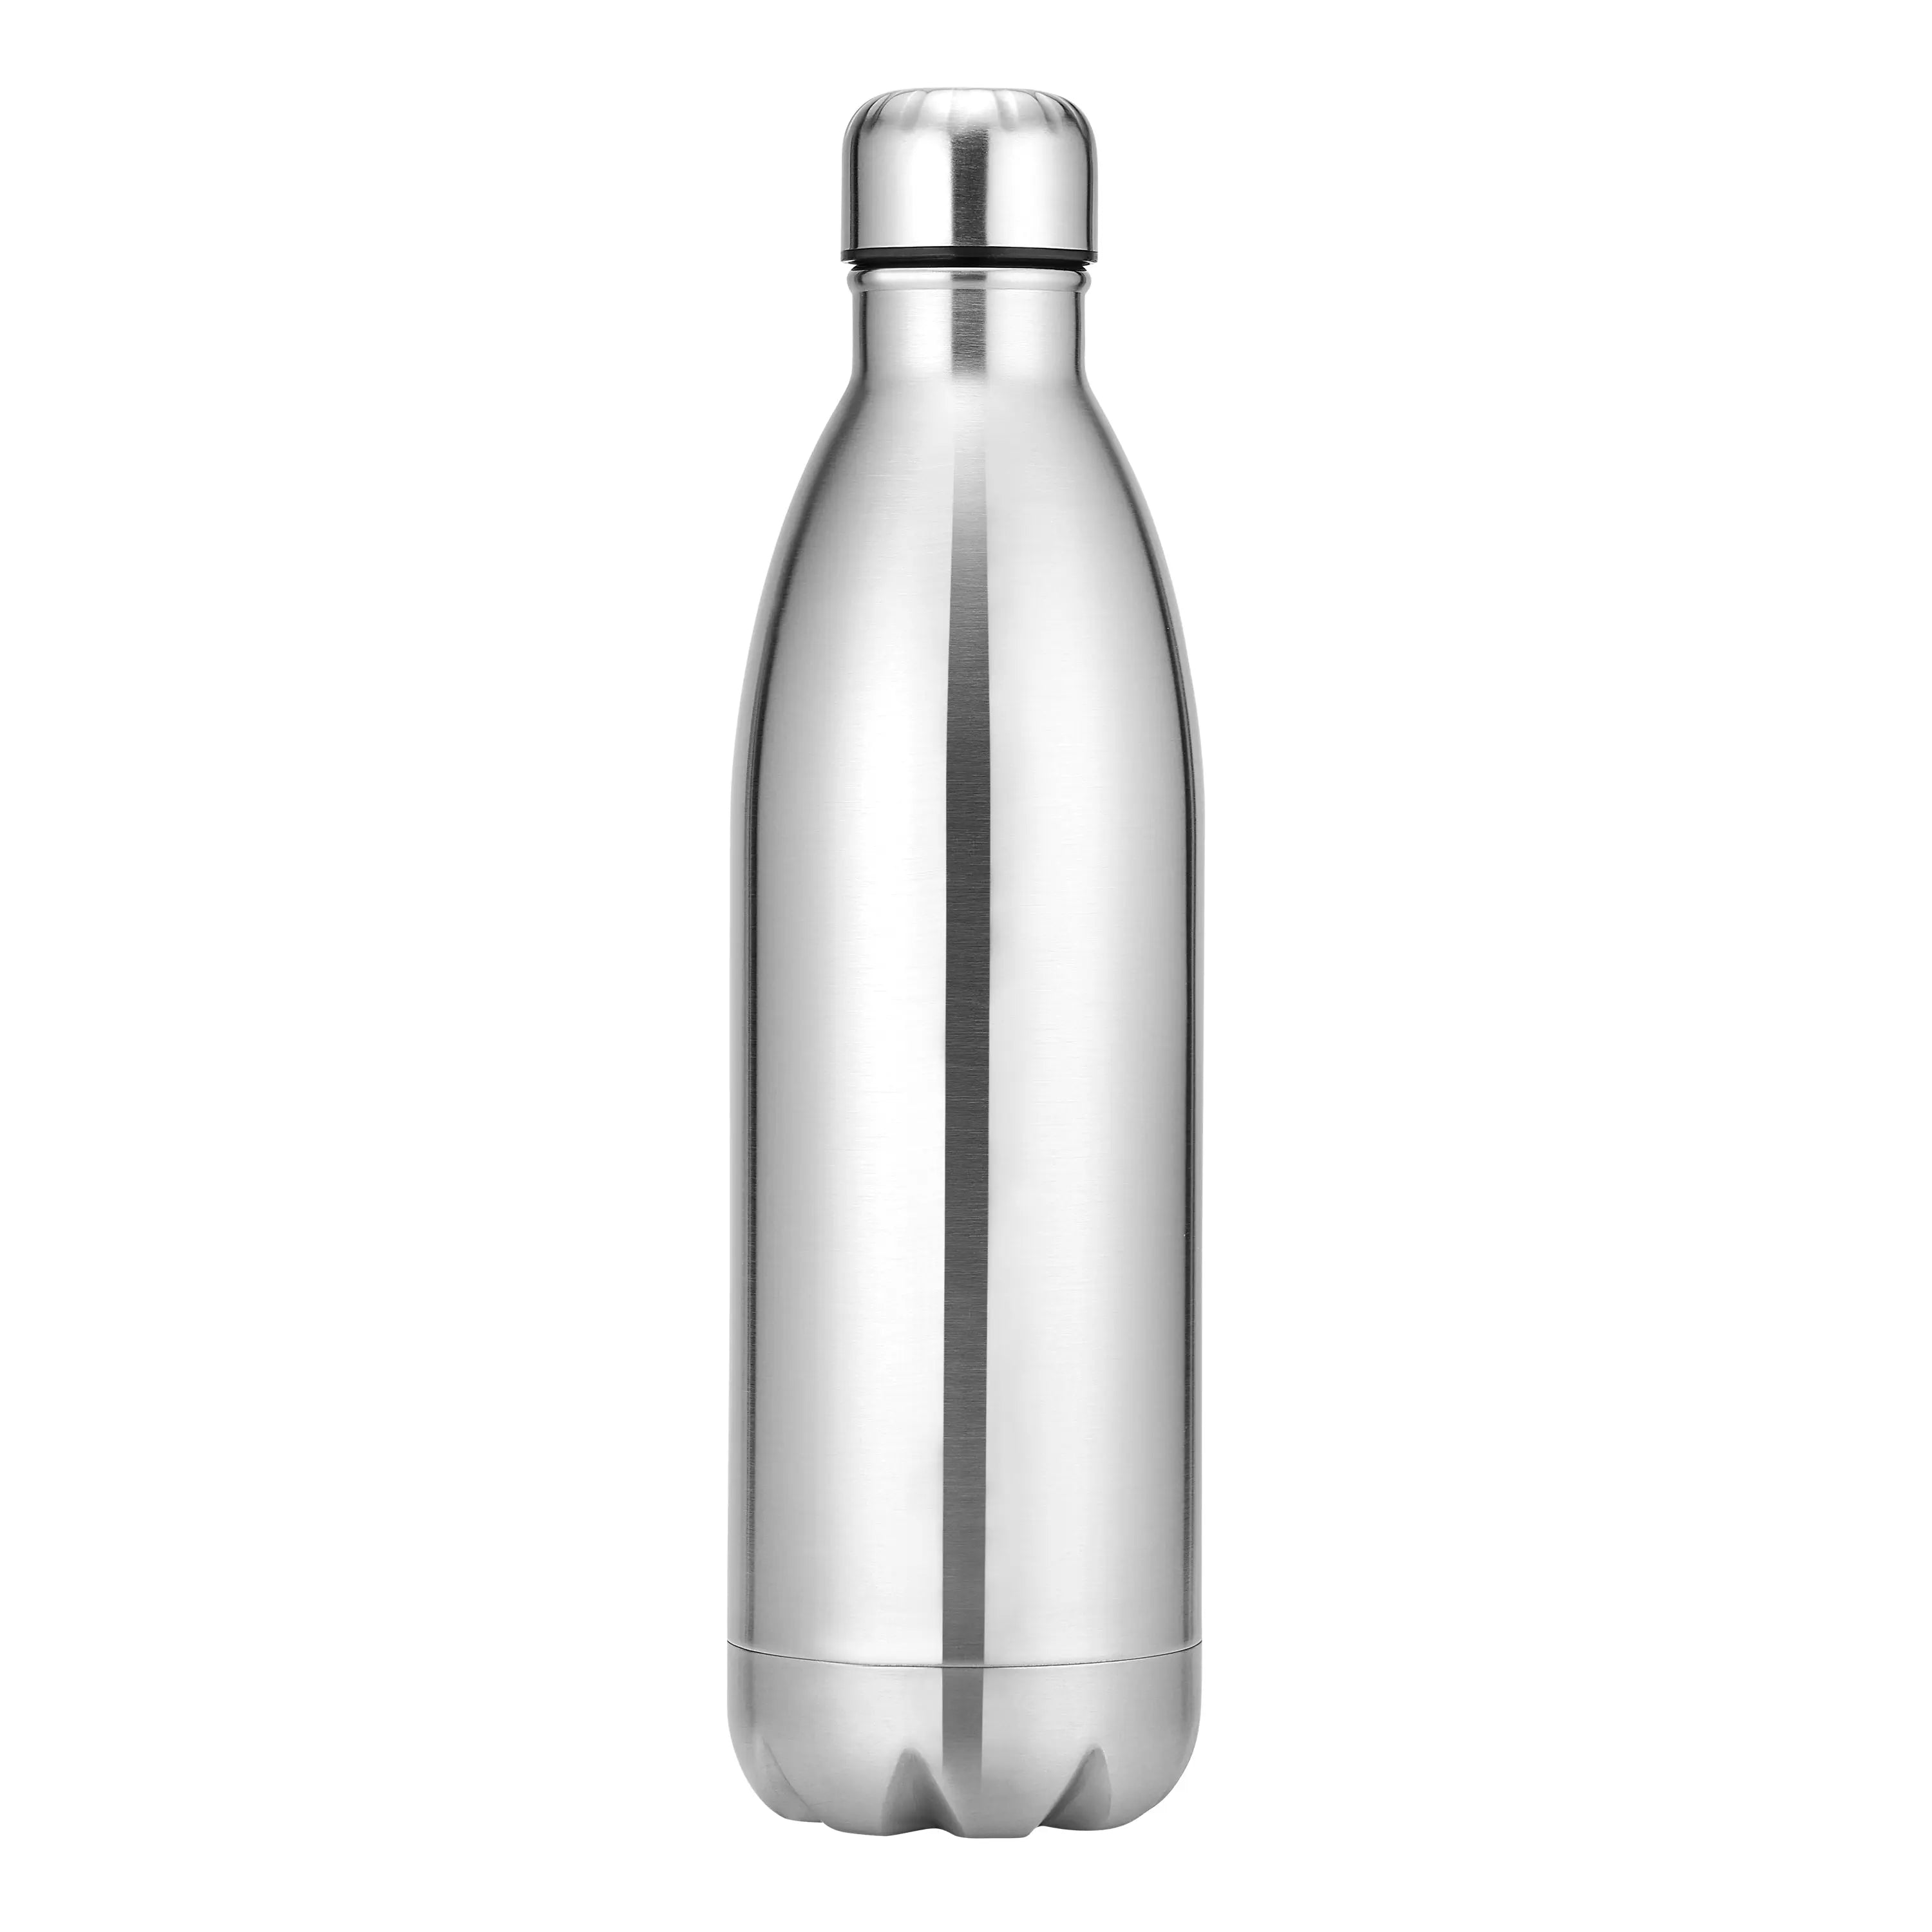 STAINLESS STEEL COLA BOTTLE - CROCKERY WALA AND COMPANY 